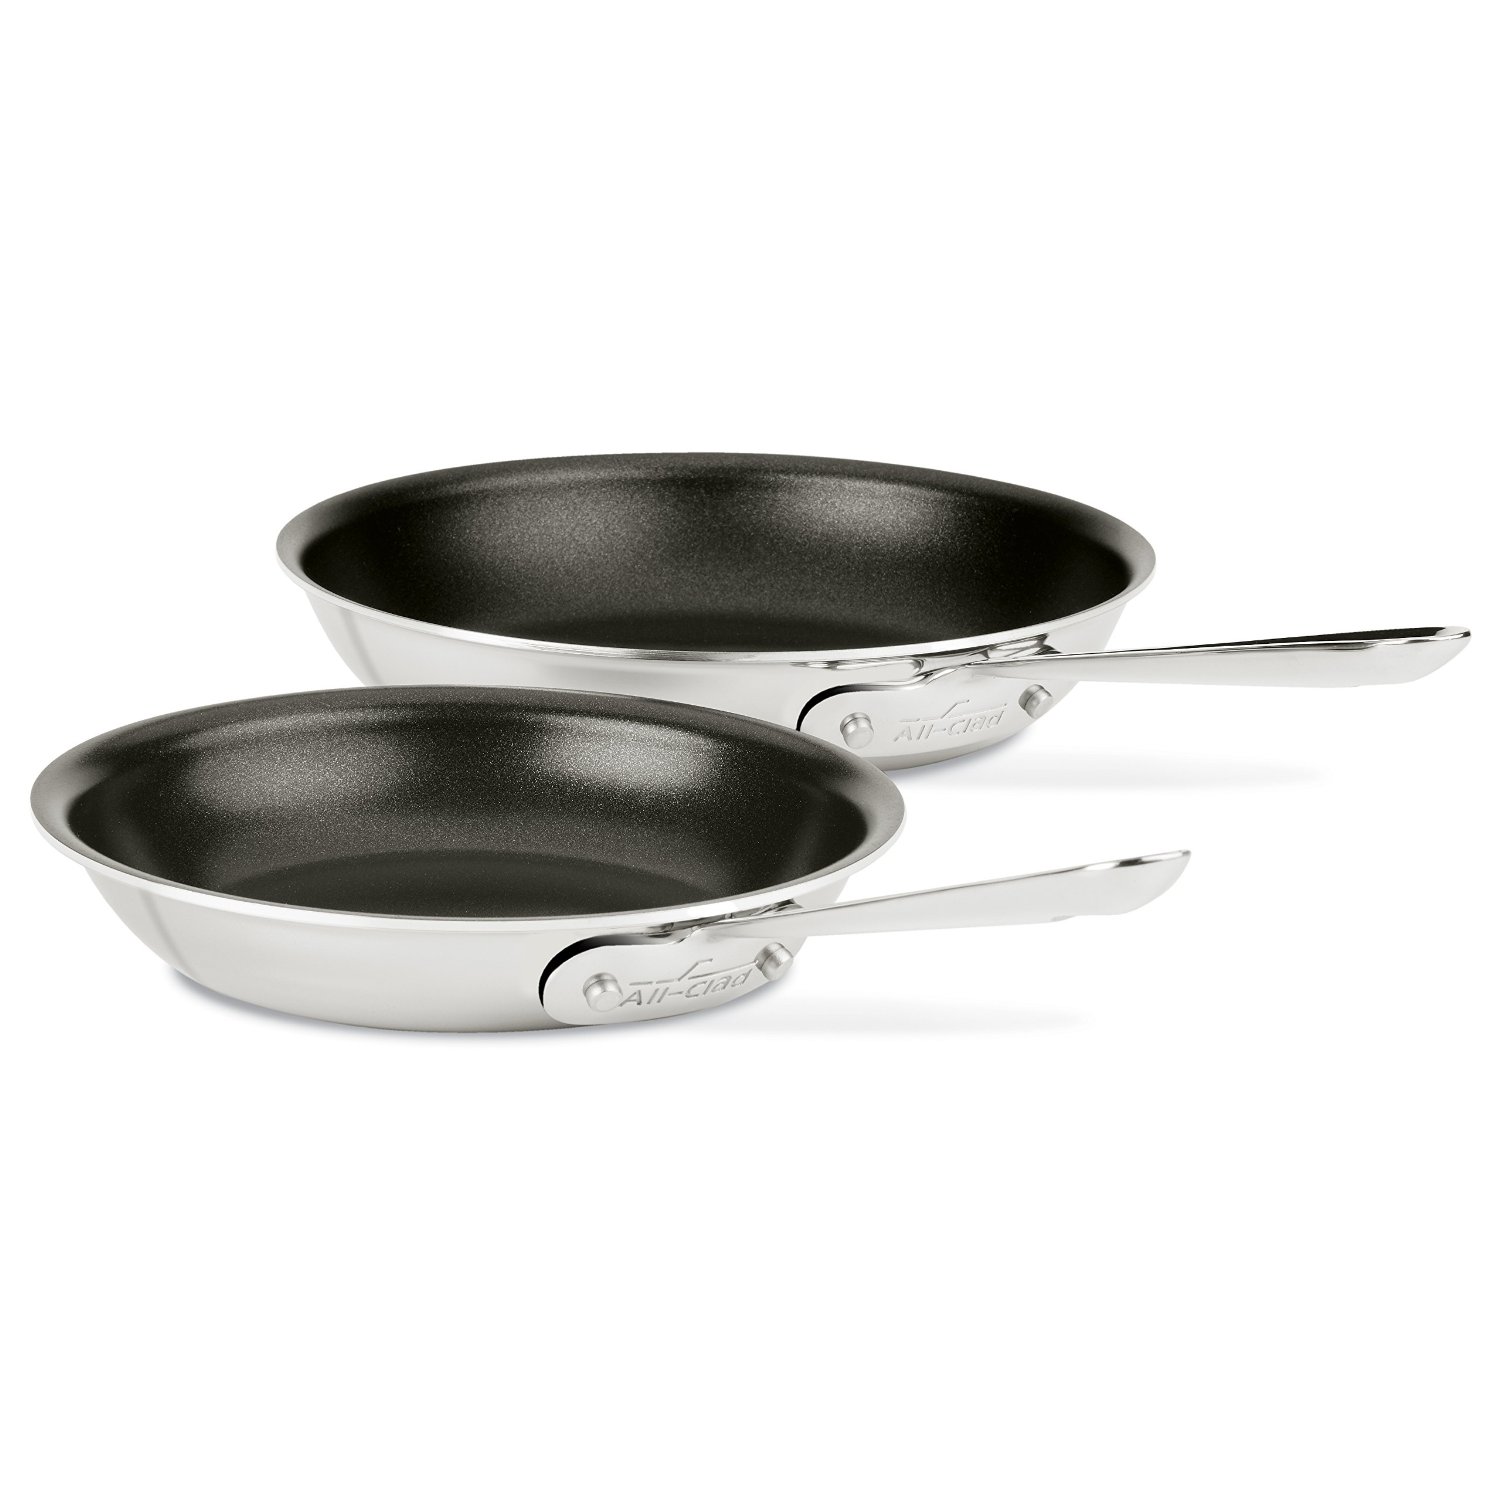 All-Clad 410810 NSR2 Stainless Steel Dishwasher Safe Oven Safe Nontick 8-Inch and 10-Inch Fry Pan Set, 2-Piece, Black 1